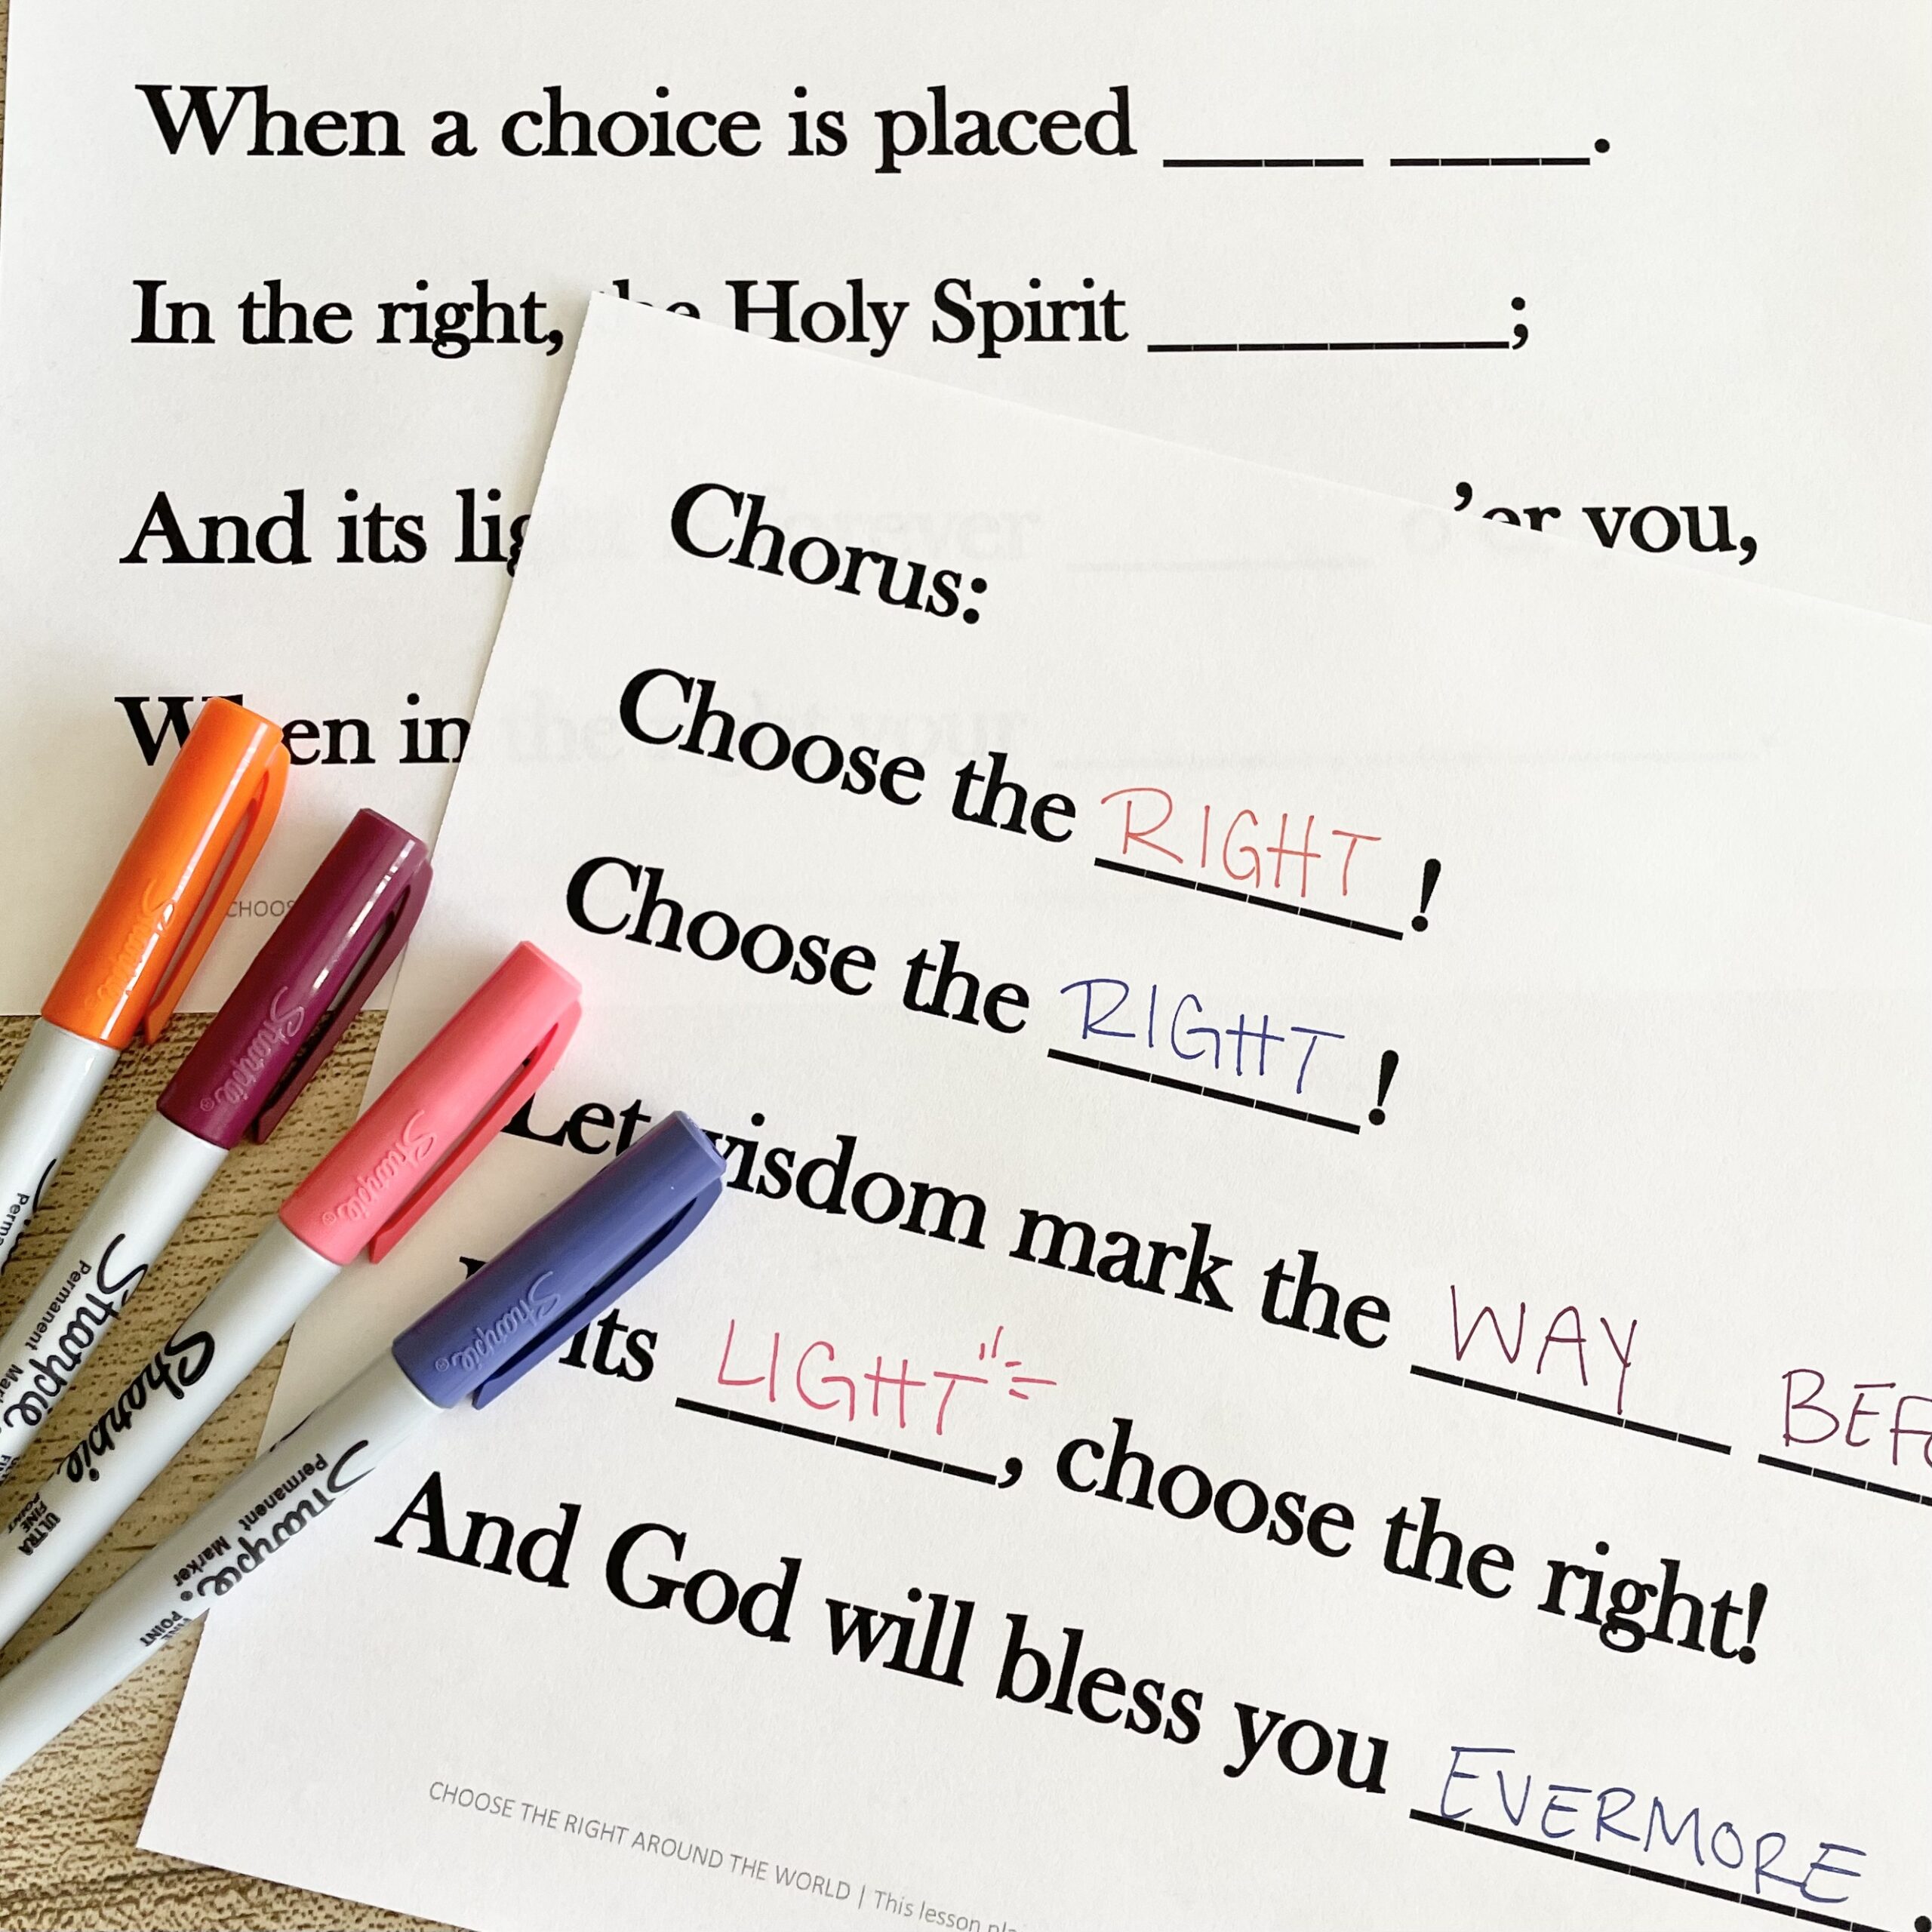 Choose the Right Around the World - use this fun word representation activity and take turns filling in missing word blanks with printable song helps for LDS Primary Music Leaders.